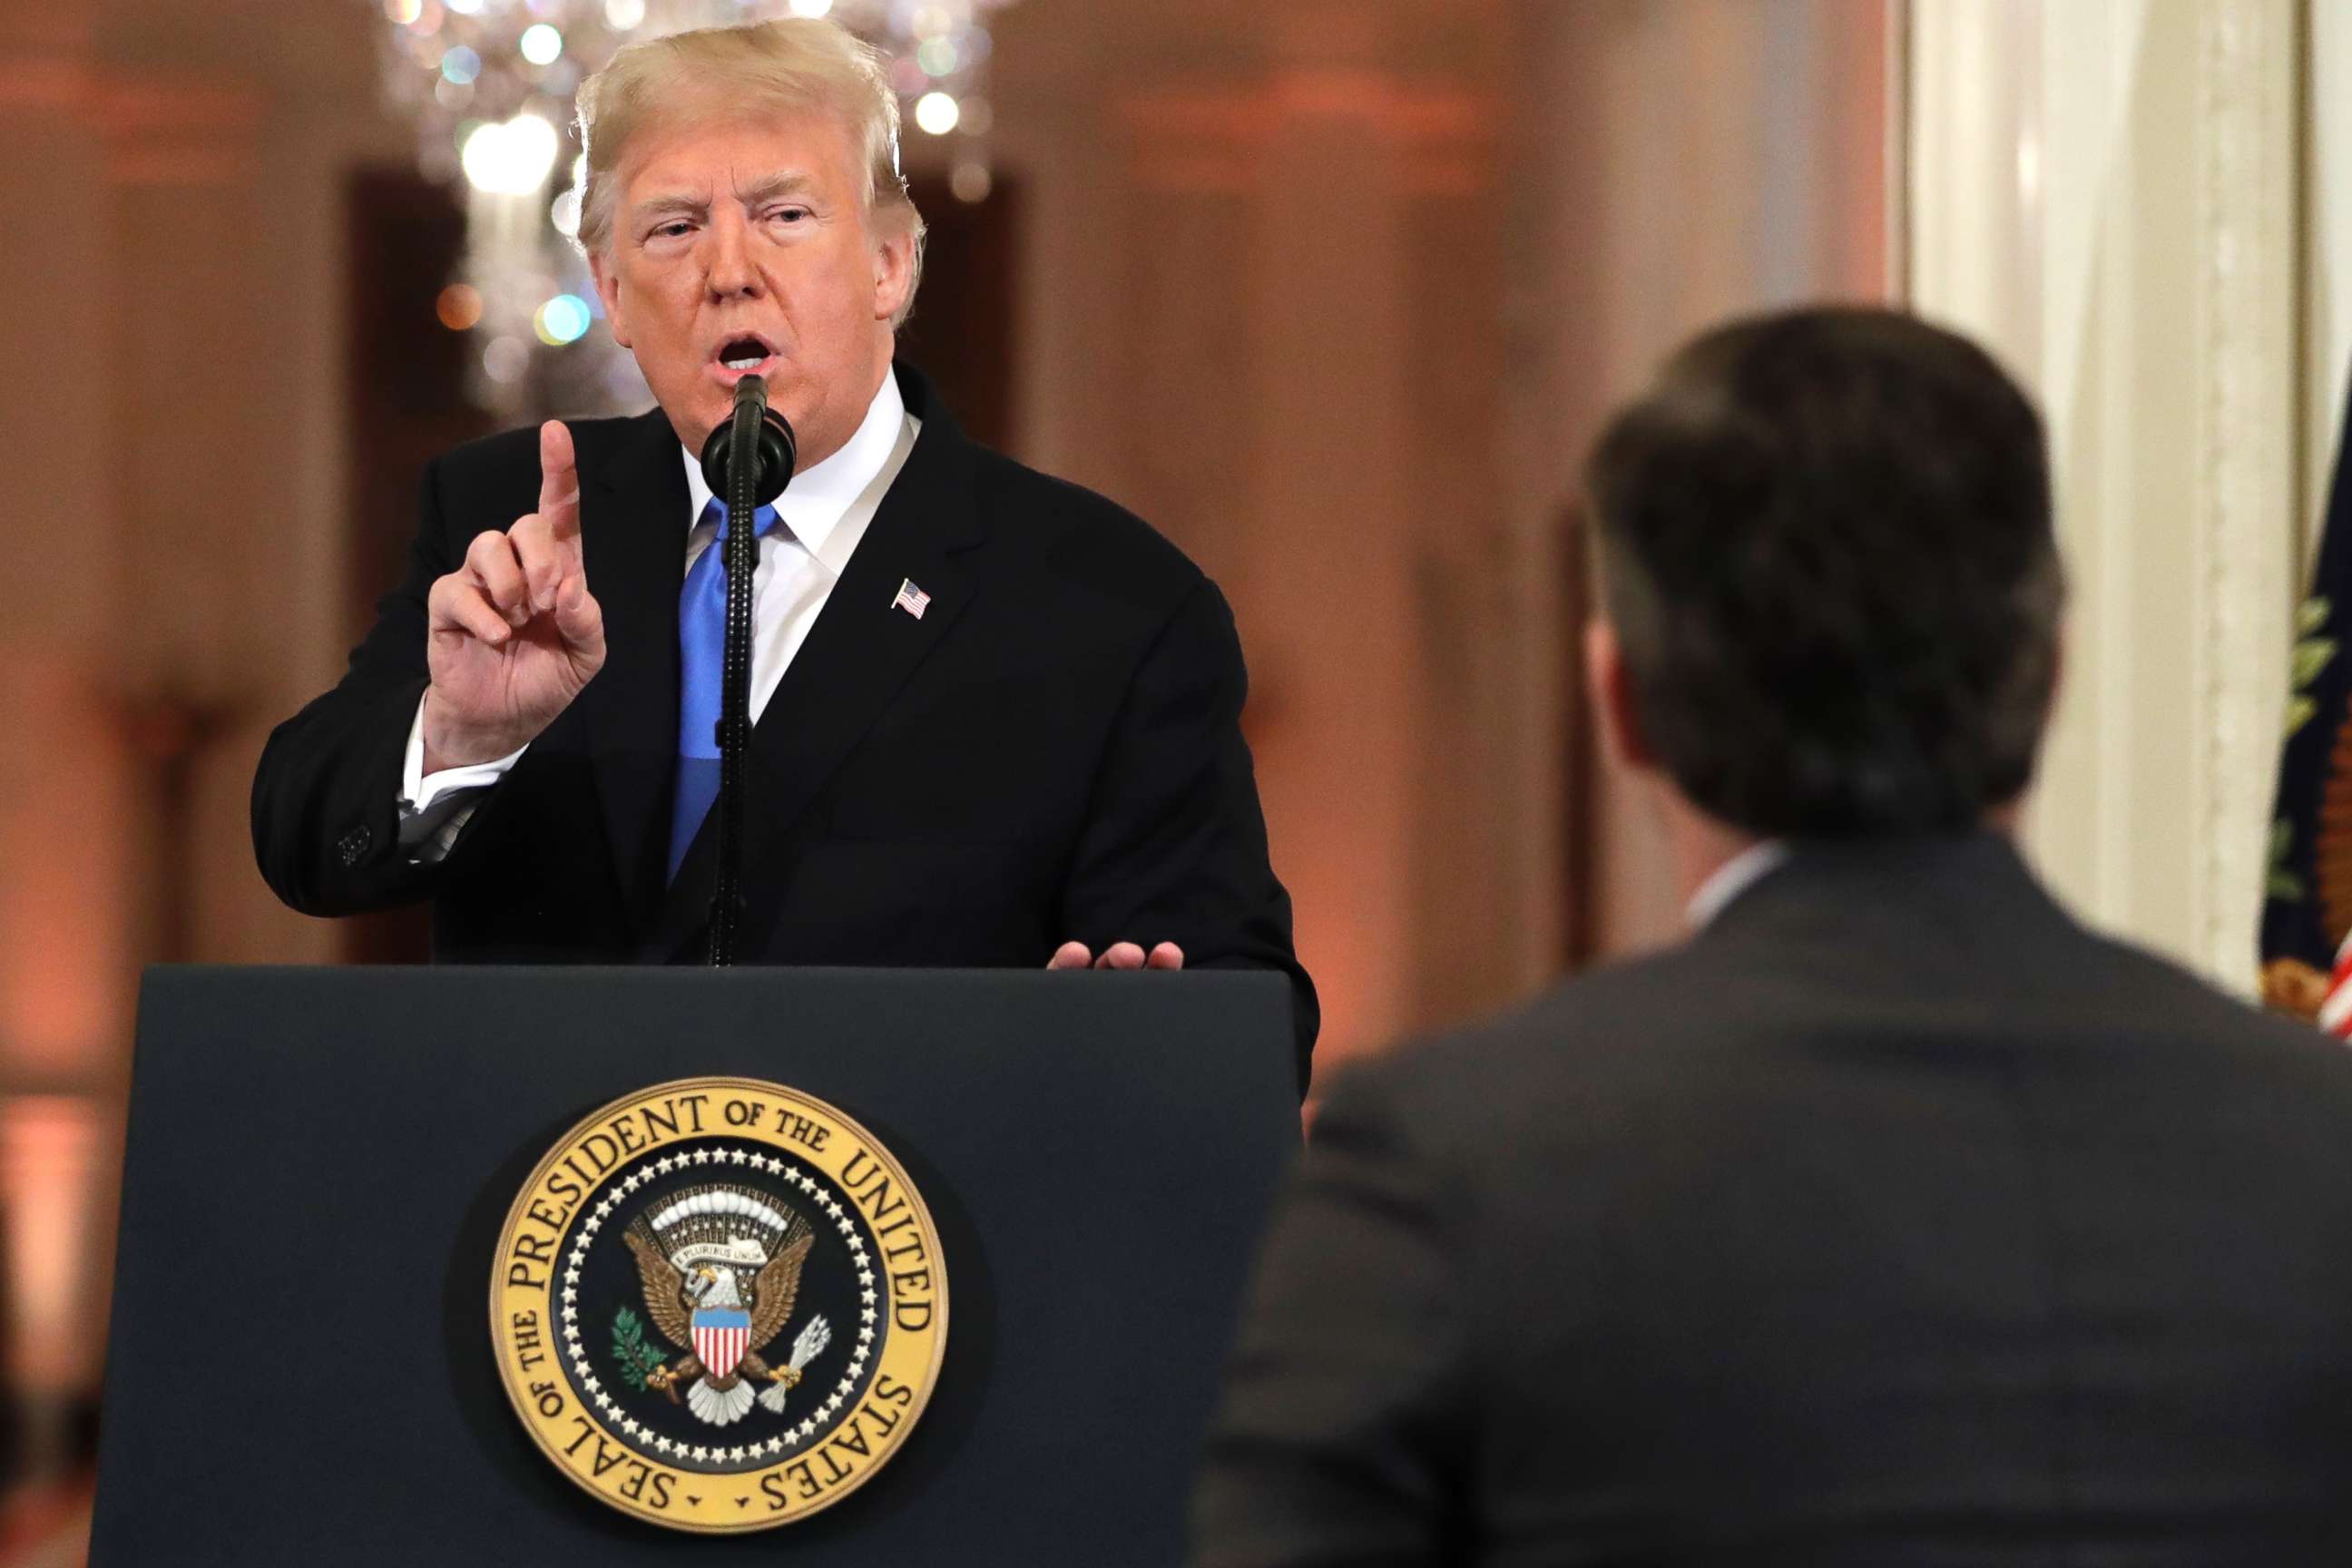 PHOTO: President Donald Trump speaks as CNN's Jim Acosta, standing at right, listens, during a news conference in the East Room of the White House, Nov. 7, 2018, in Washington.